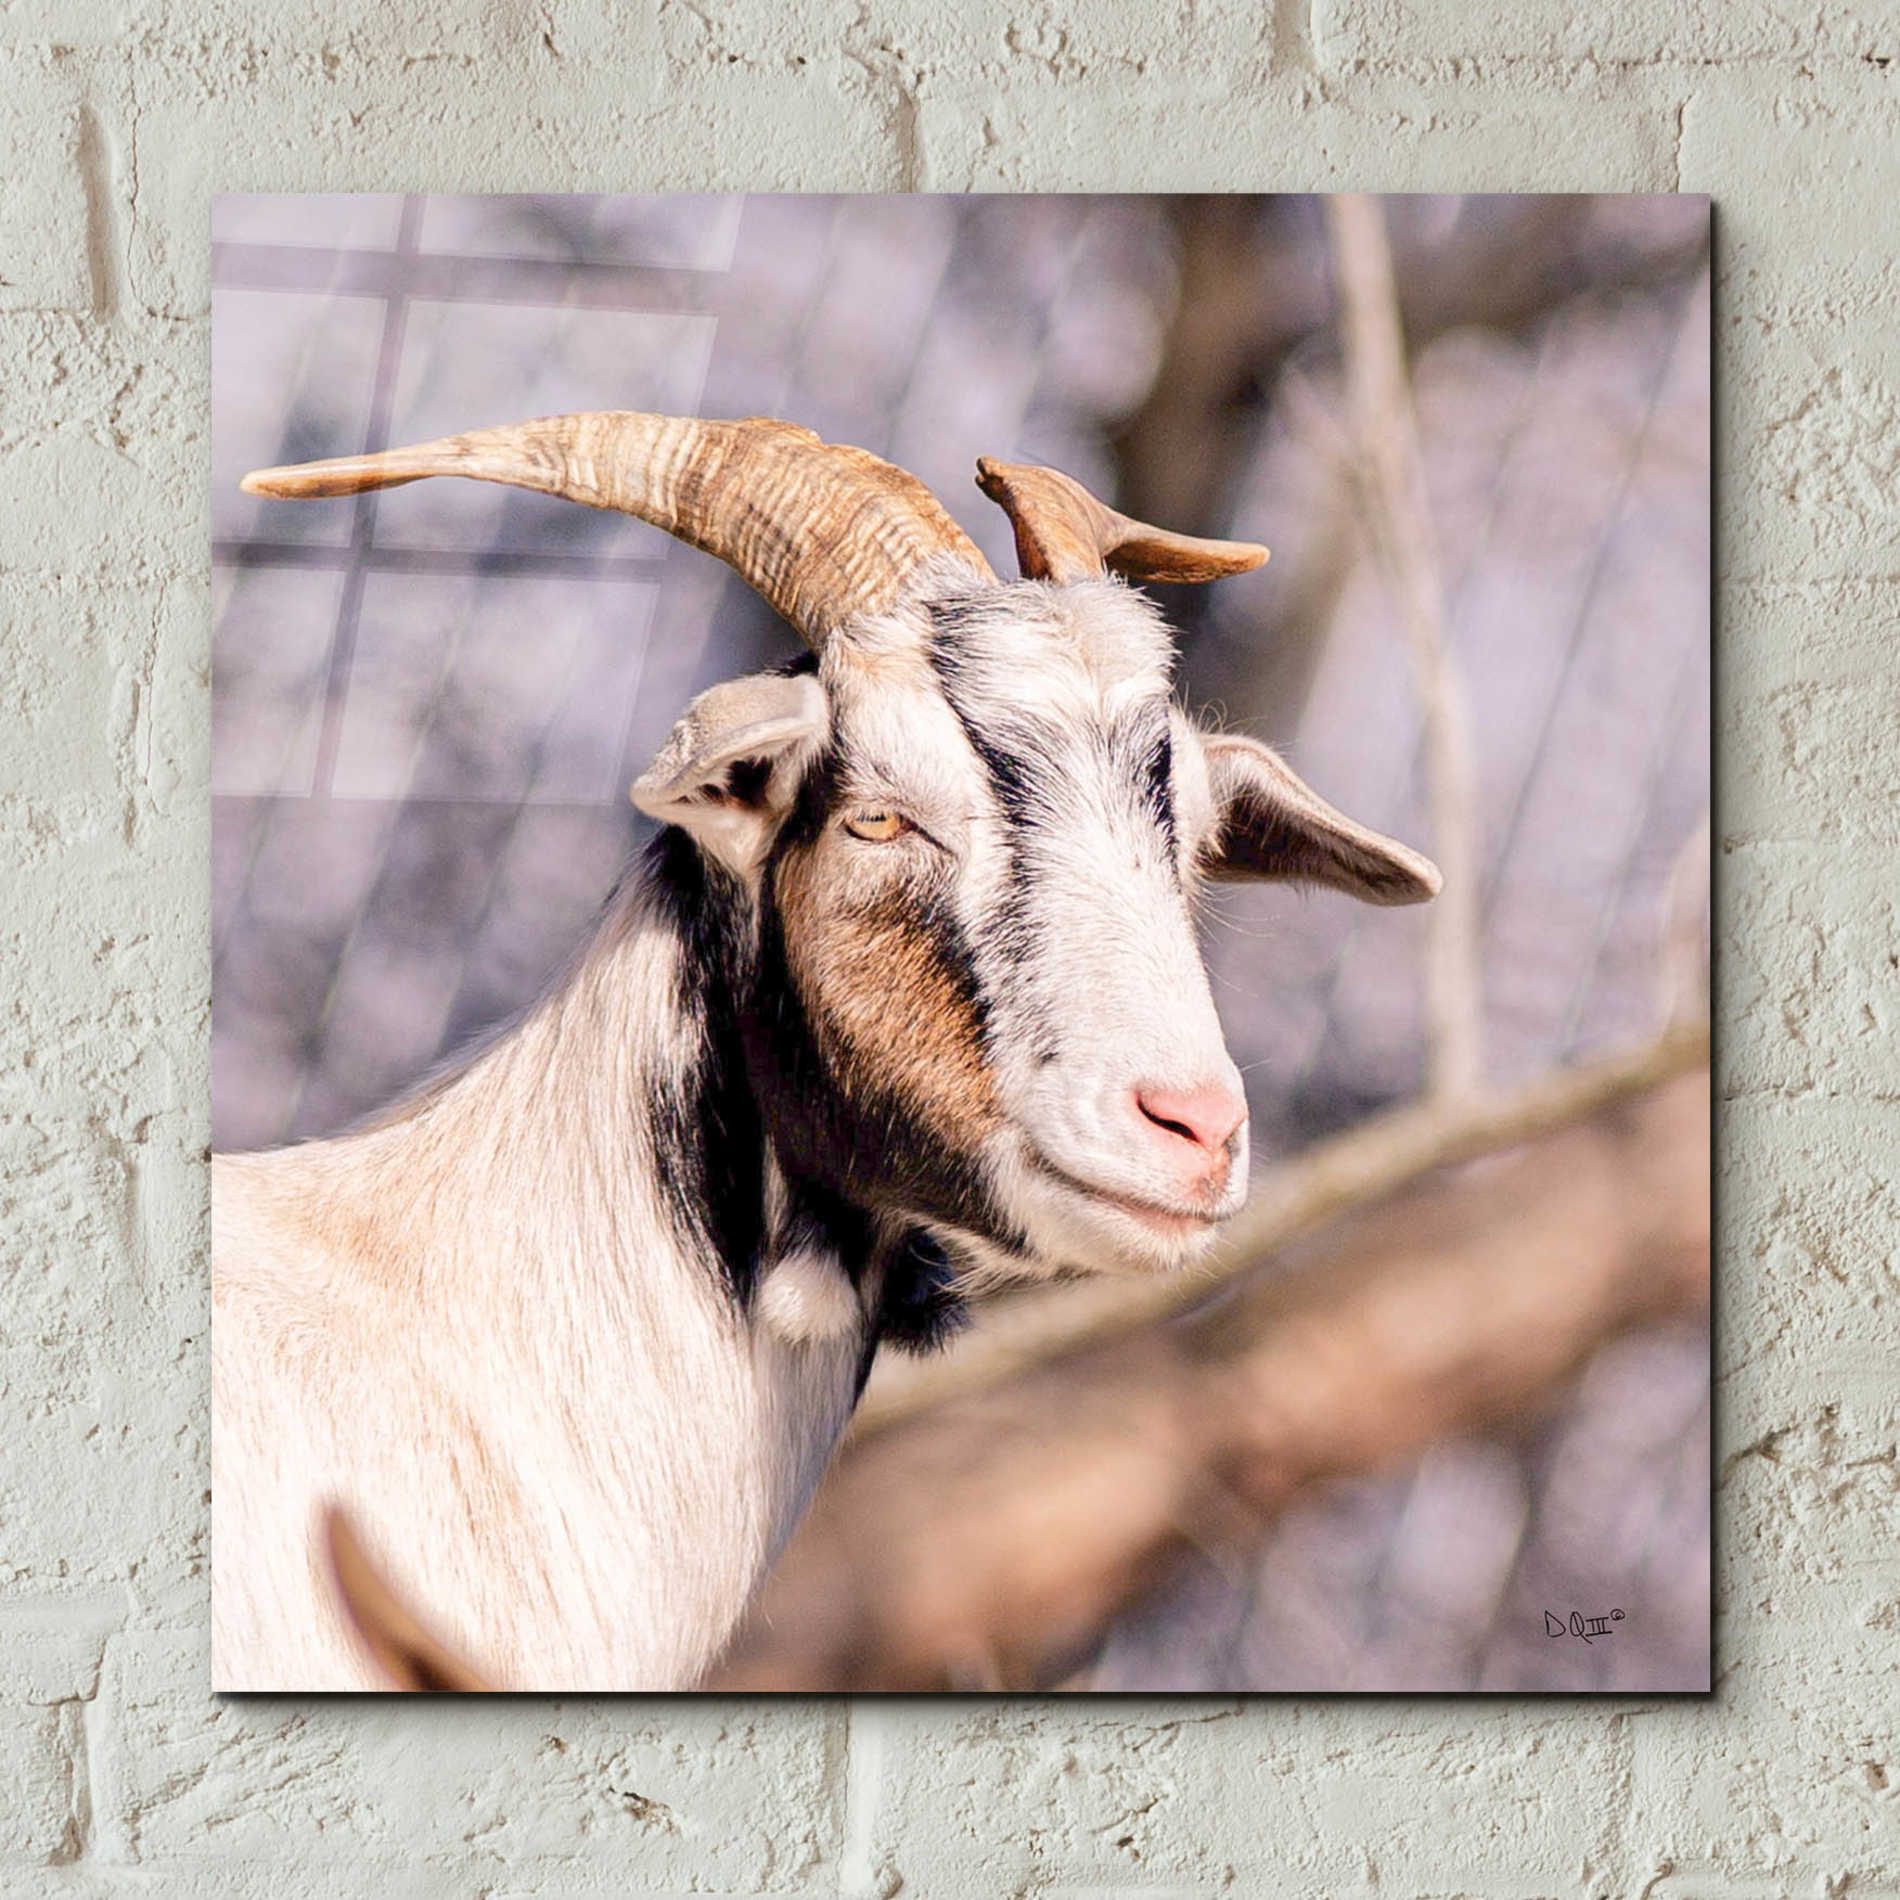 Epic Art 'Brown Goat' by Donnie Quillen, Acrylic Glass Wall Art,12x12